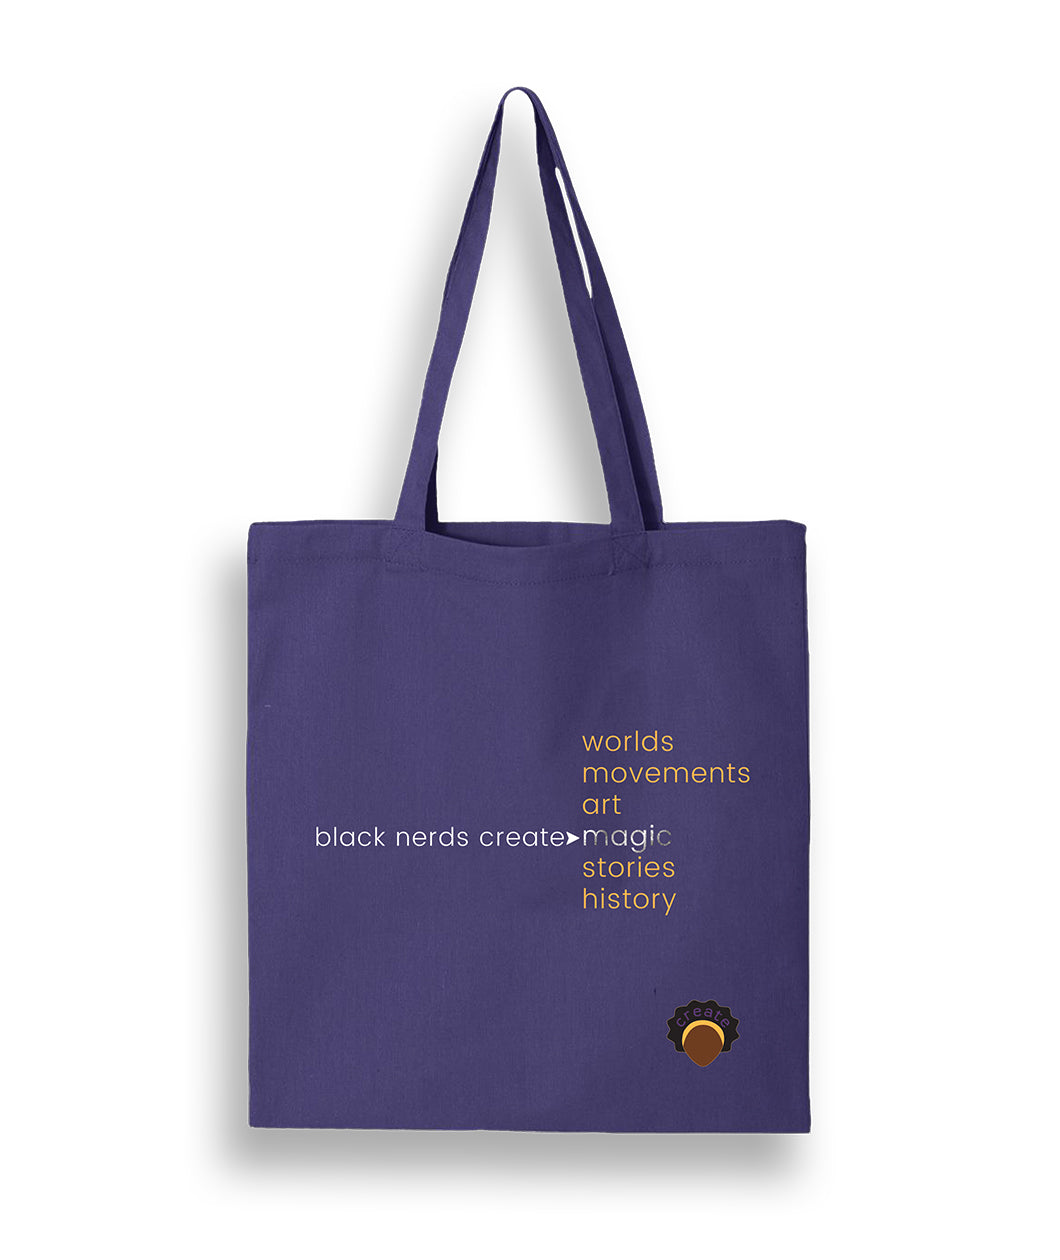 A purple canvas tote bag with text that says 